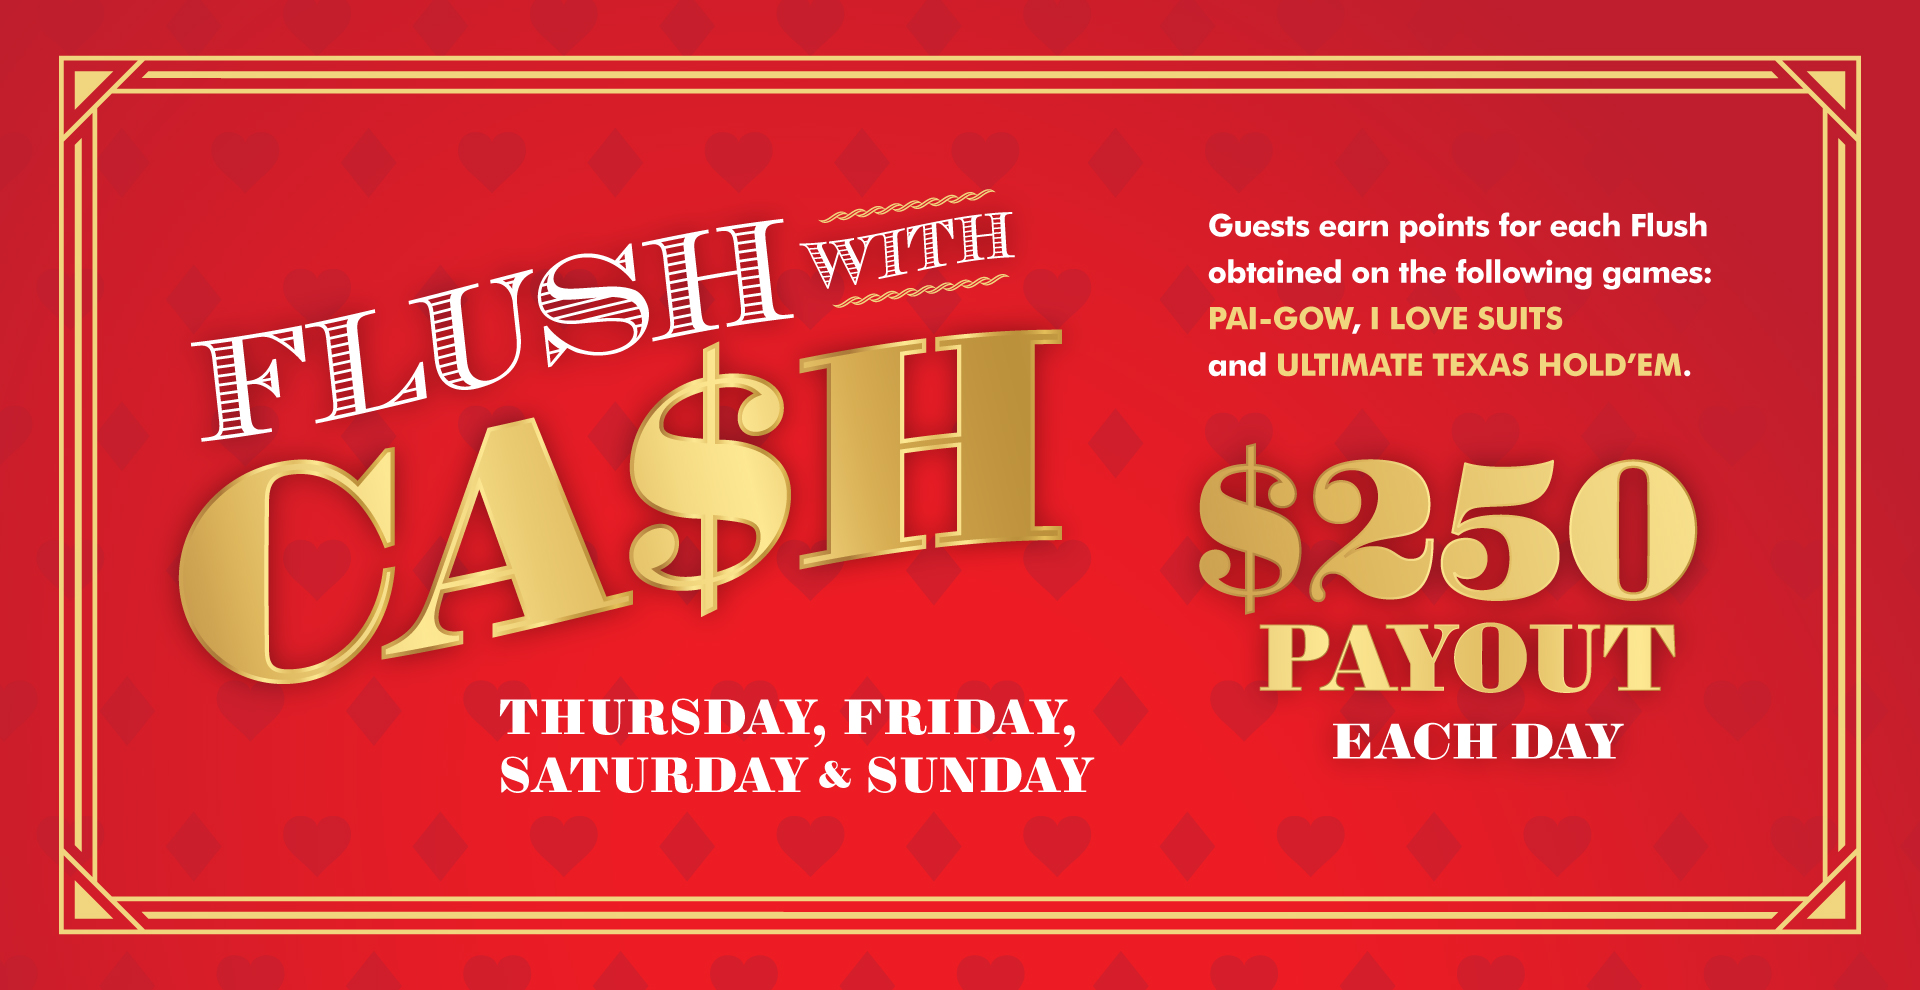 Silver Dollar Casino Mill Creek | Flush with Cash Points Race